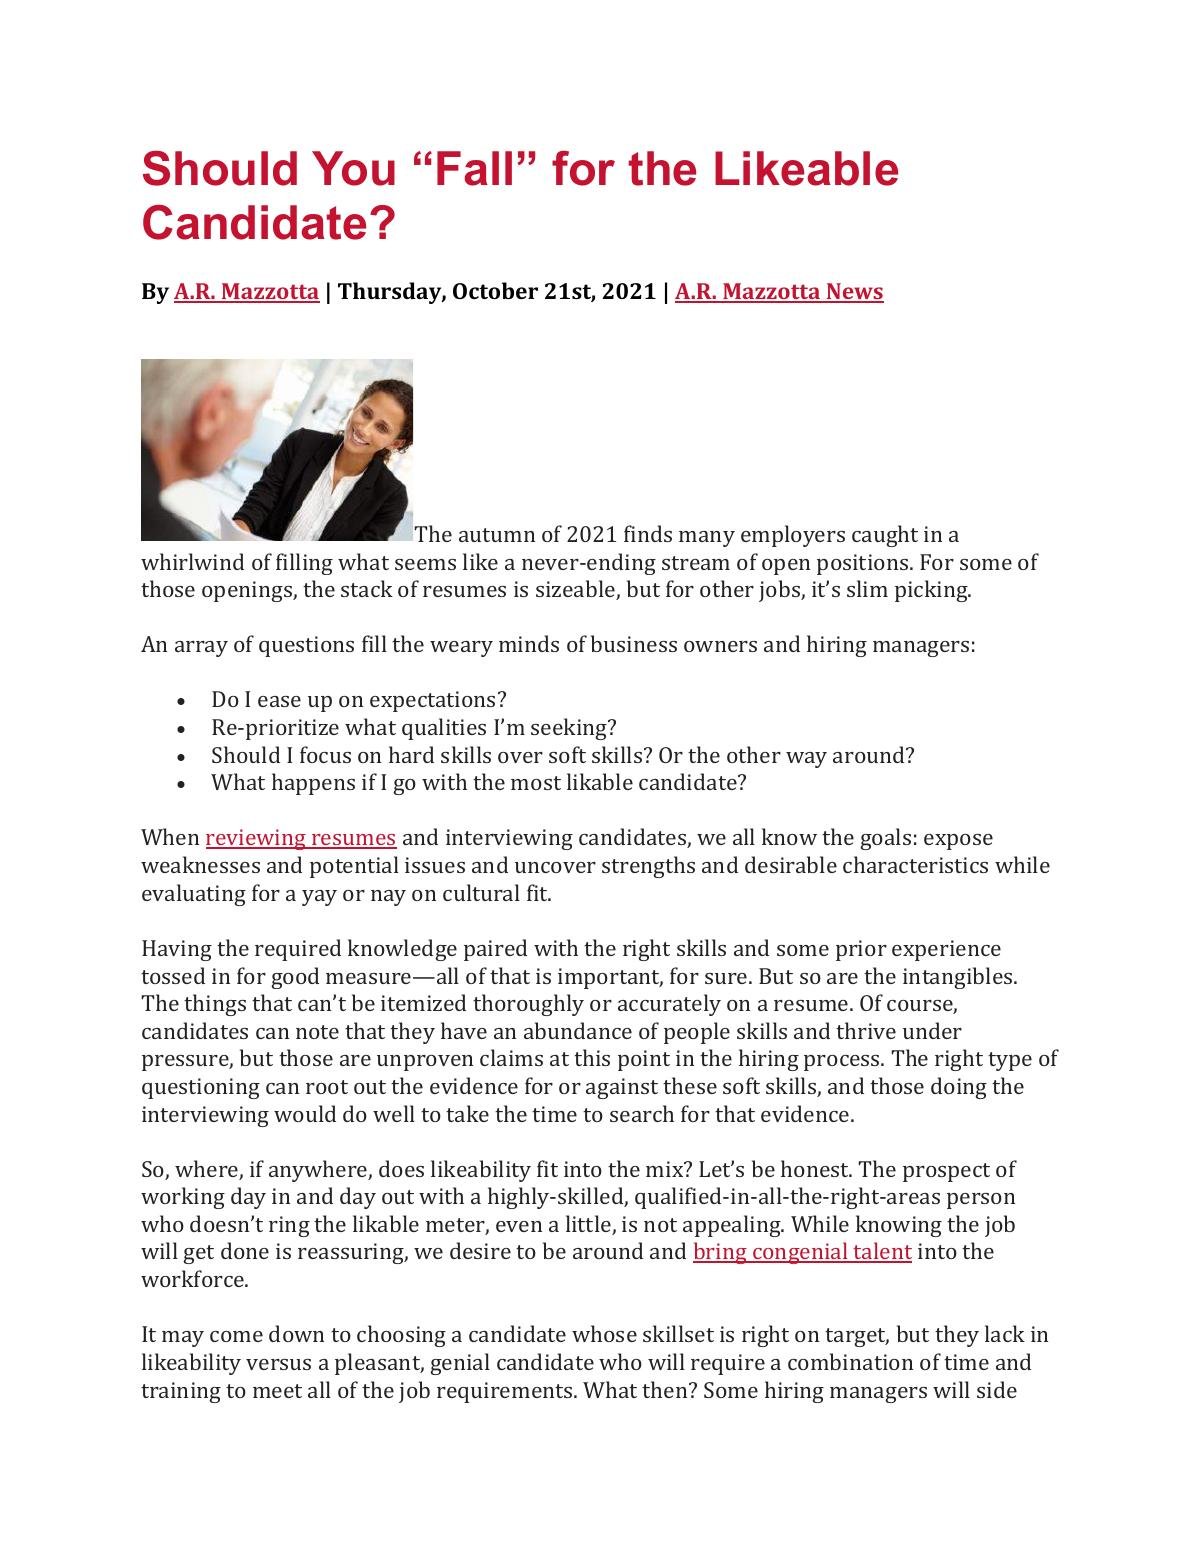 Should You "Fall" for the Likeable Candidate?